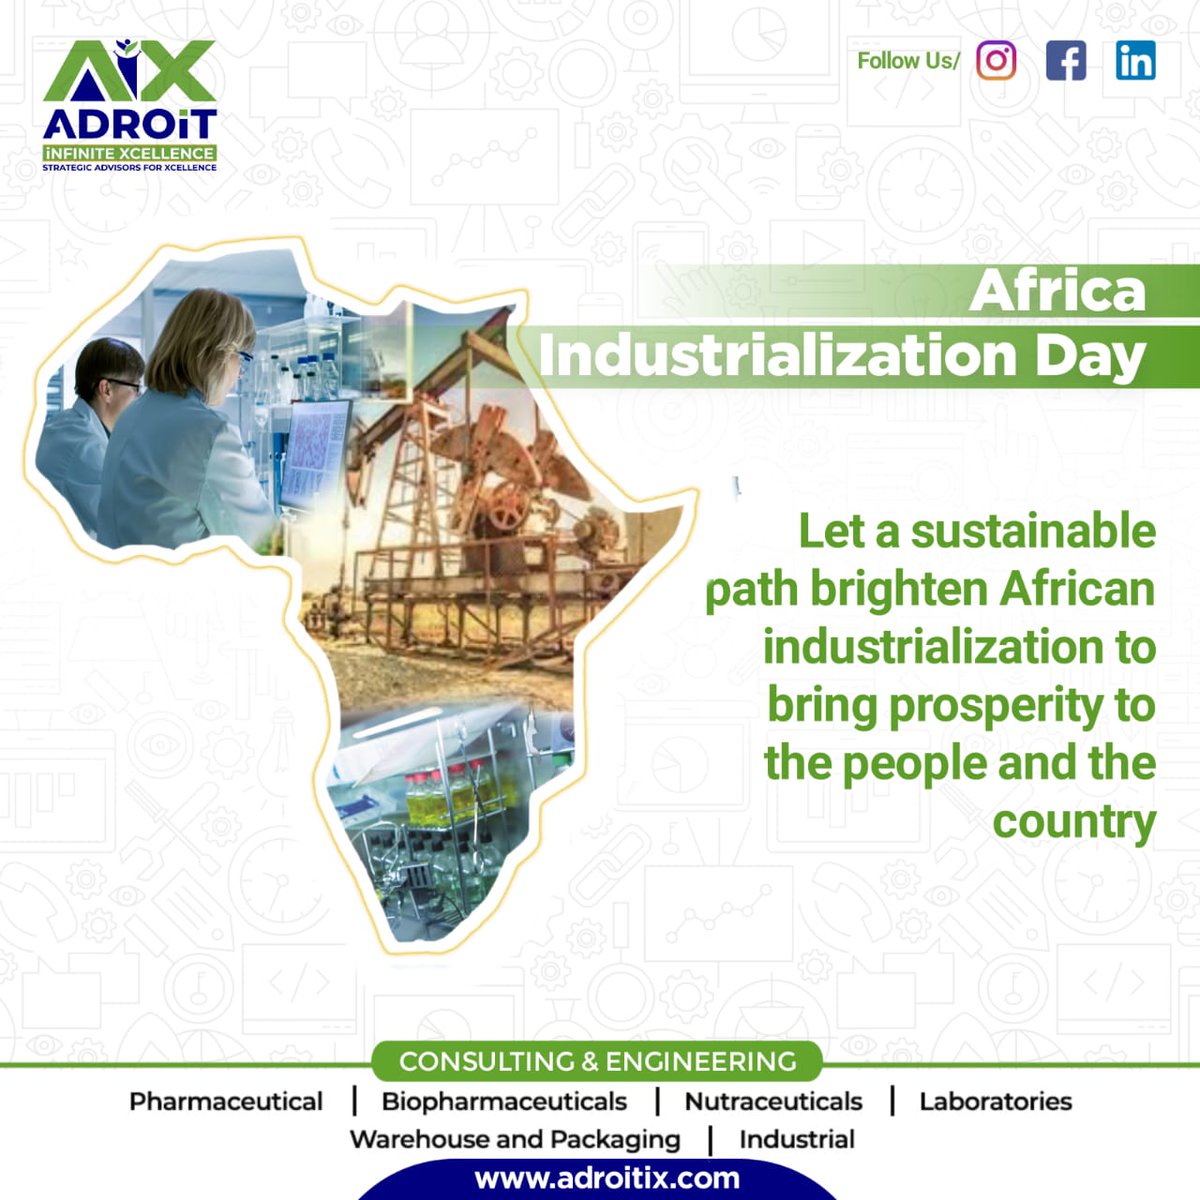 Celebrating the resilience and progress of African nations on Industrialization Day, as innovation and growth pave the way for a brighter economic future across the continent.

#AiX #Africa #industrialization #progress #pharmaceutical #engineering #designconsultants